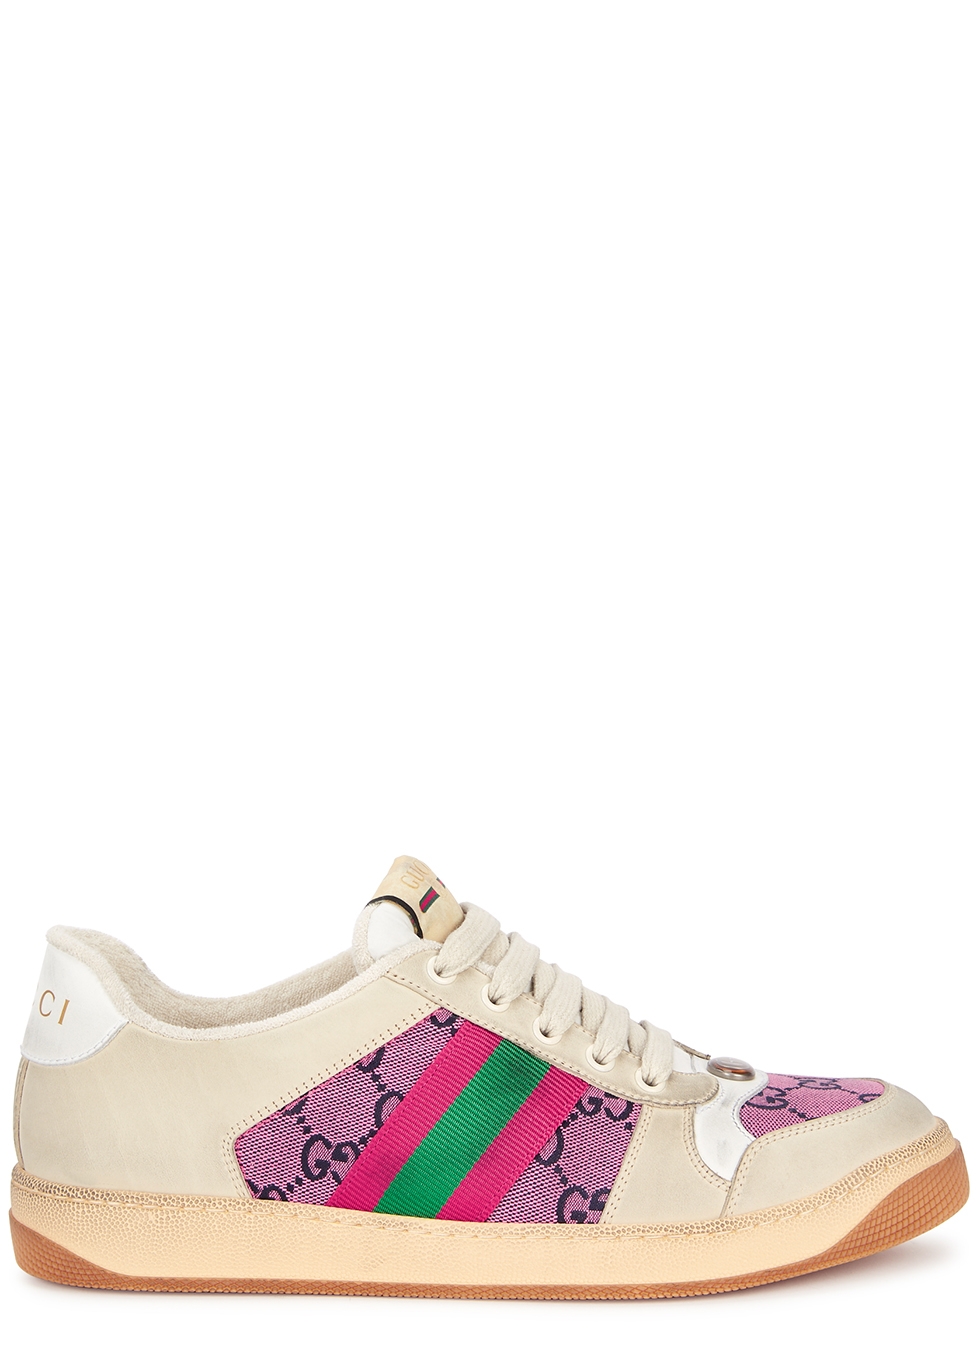 gucci trainers house of fraser